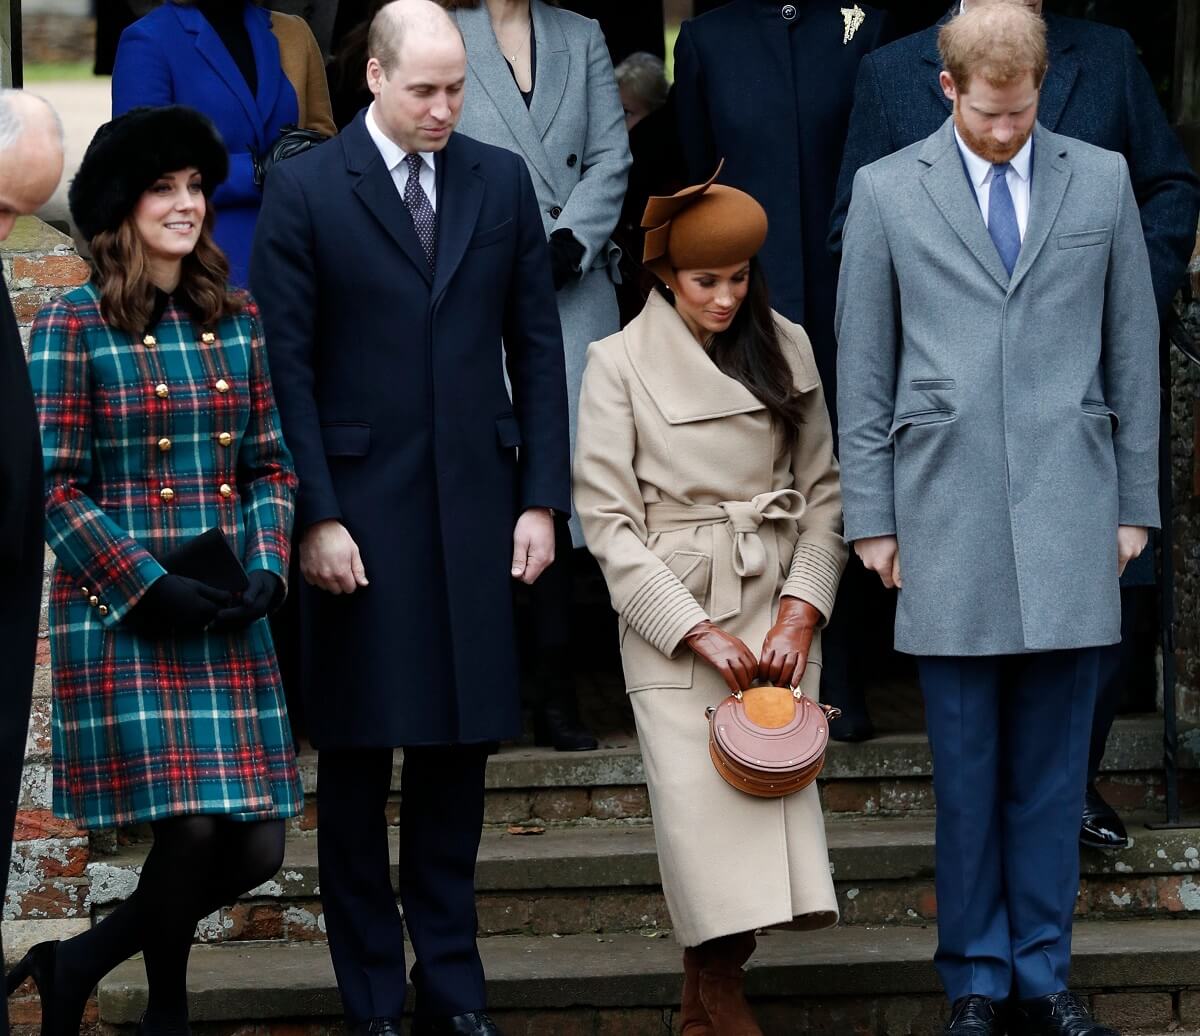 Kate Middleton, Prince William, Prince Harry and Meghan Markle, whose curtsies to Queen Elizabeth have gone viral, bow as monarch leaves